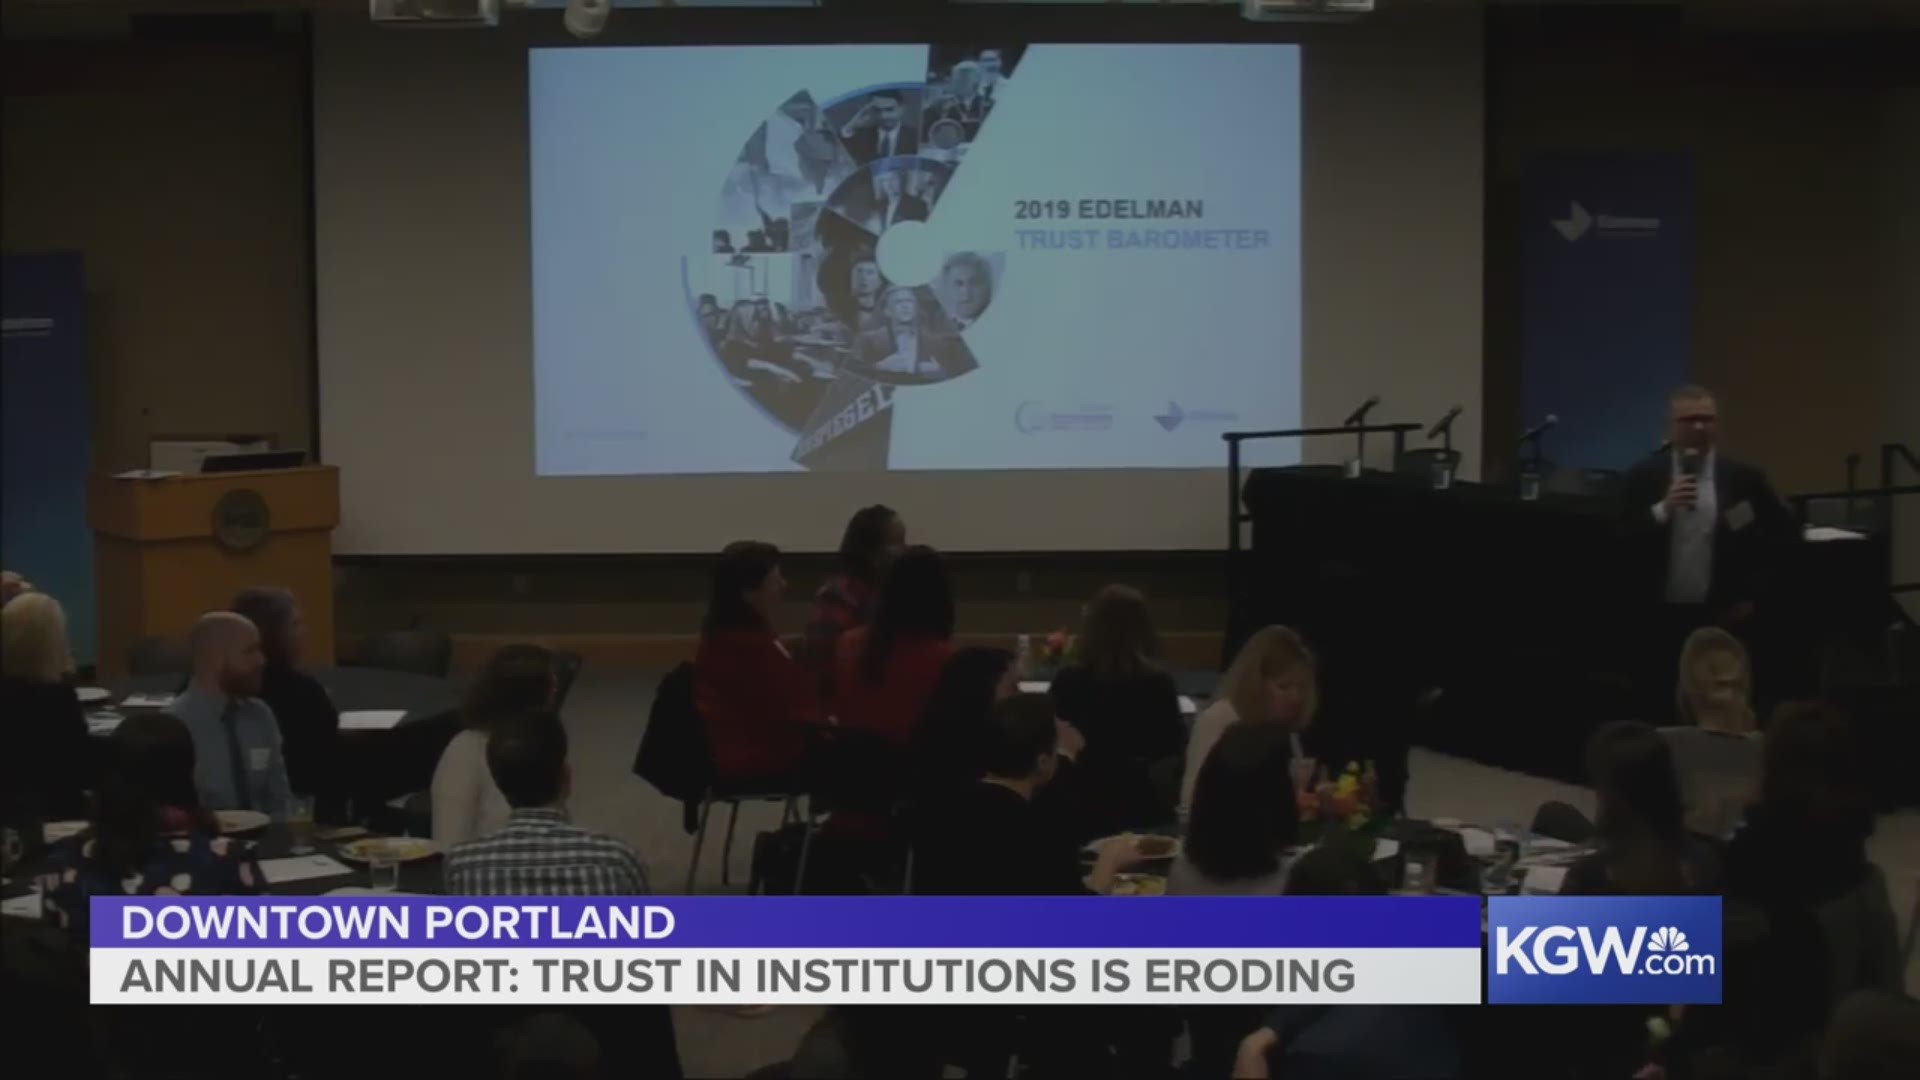 The annual survey measures trust in various institutions. A panel of community leaders discussed it an event in Portland on March 13.